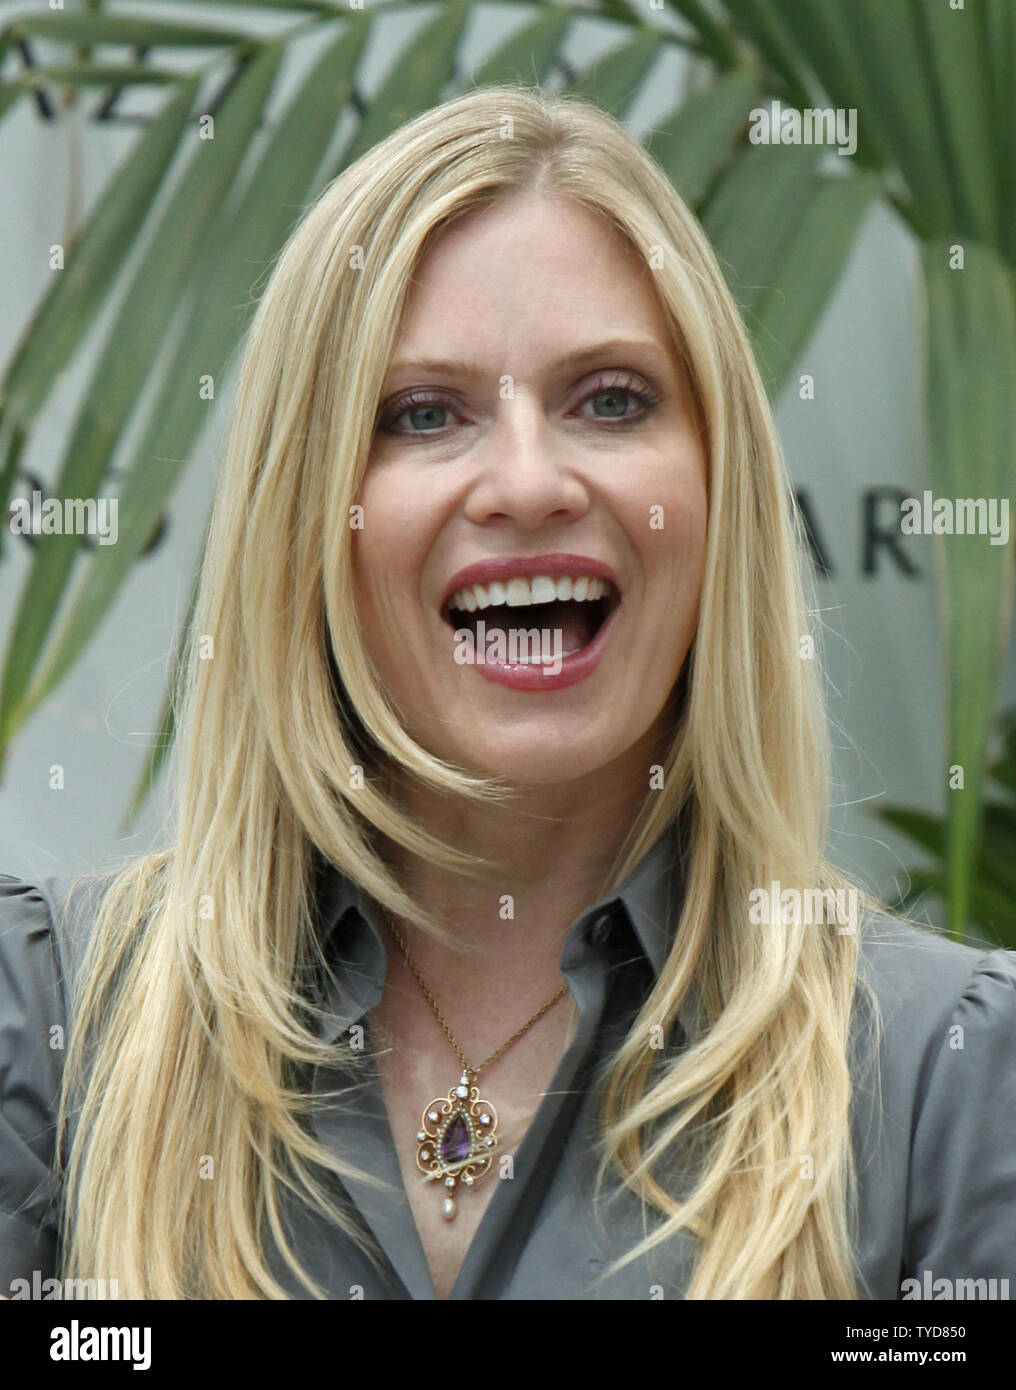 Actress Emily Proctor arrives at a photocall for the television show 'CSI:  Miami' during the 49th Monte Carlo Television Festival in Monte Carlo, Monaco on June 11, 2009.  (UPI Photo/David Silpa) Stock Photo